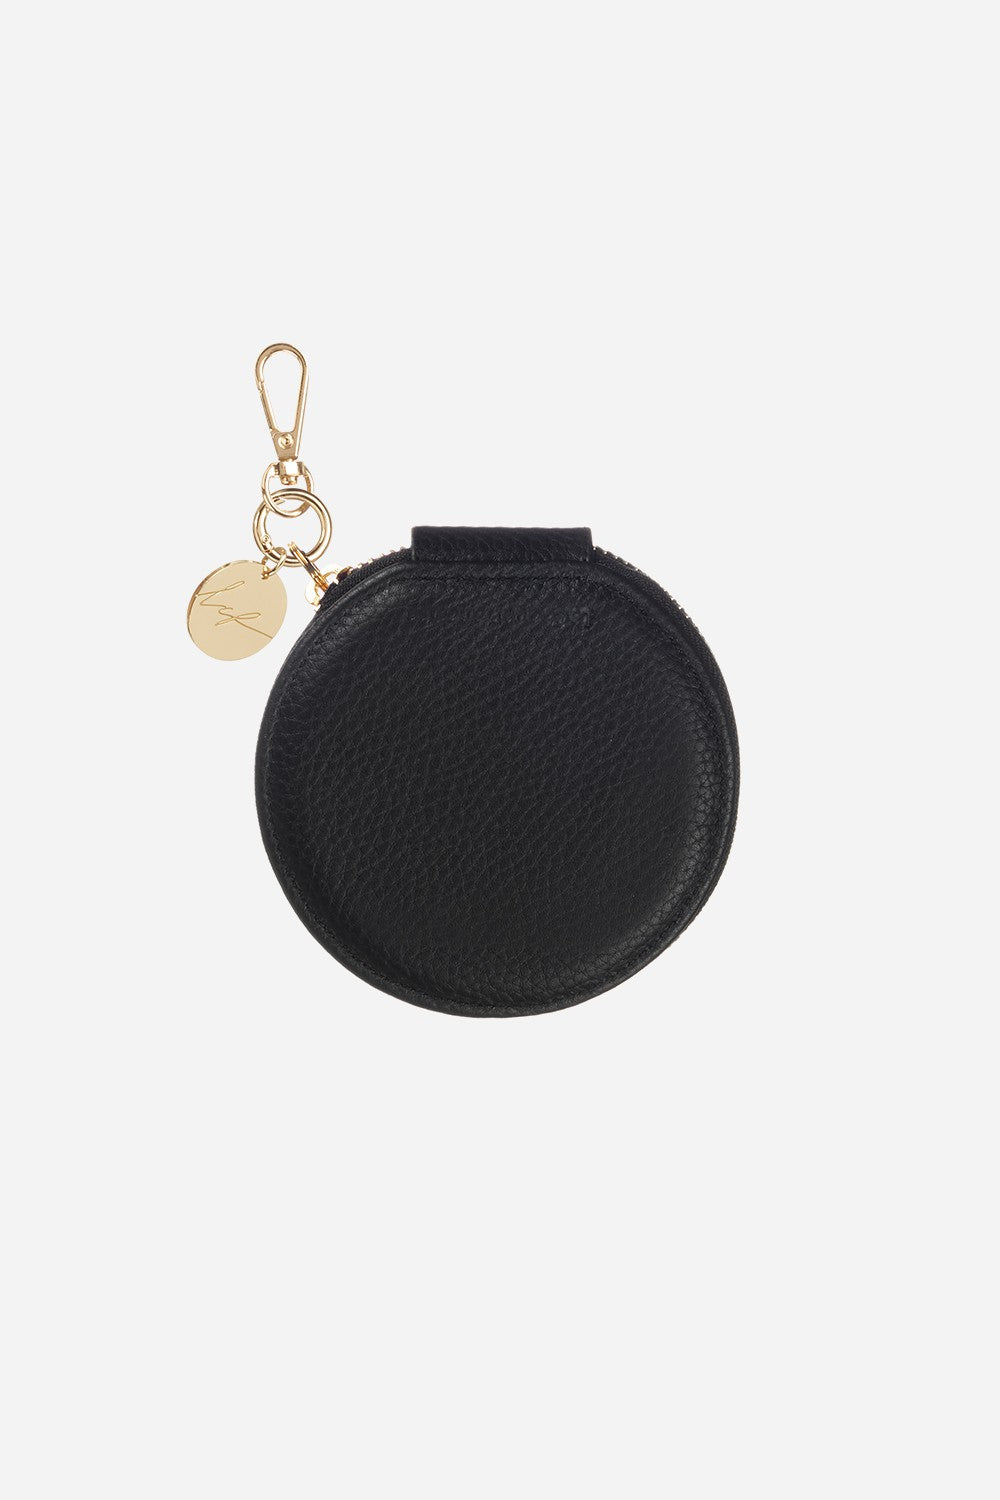 Coin Purse With Carabiner Black Leather